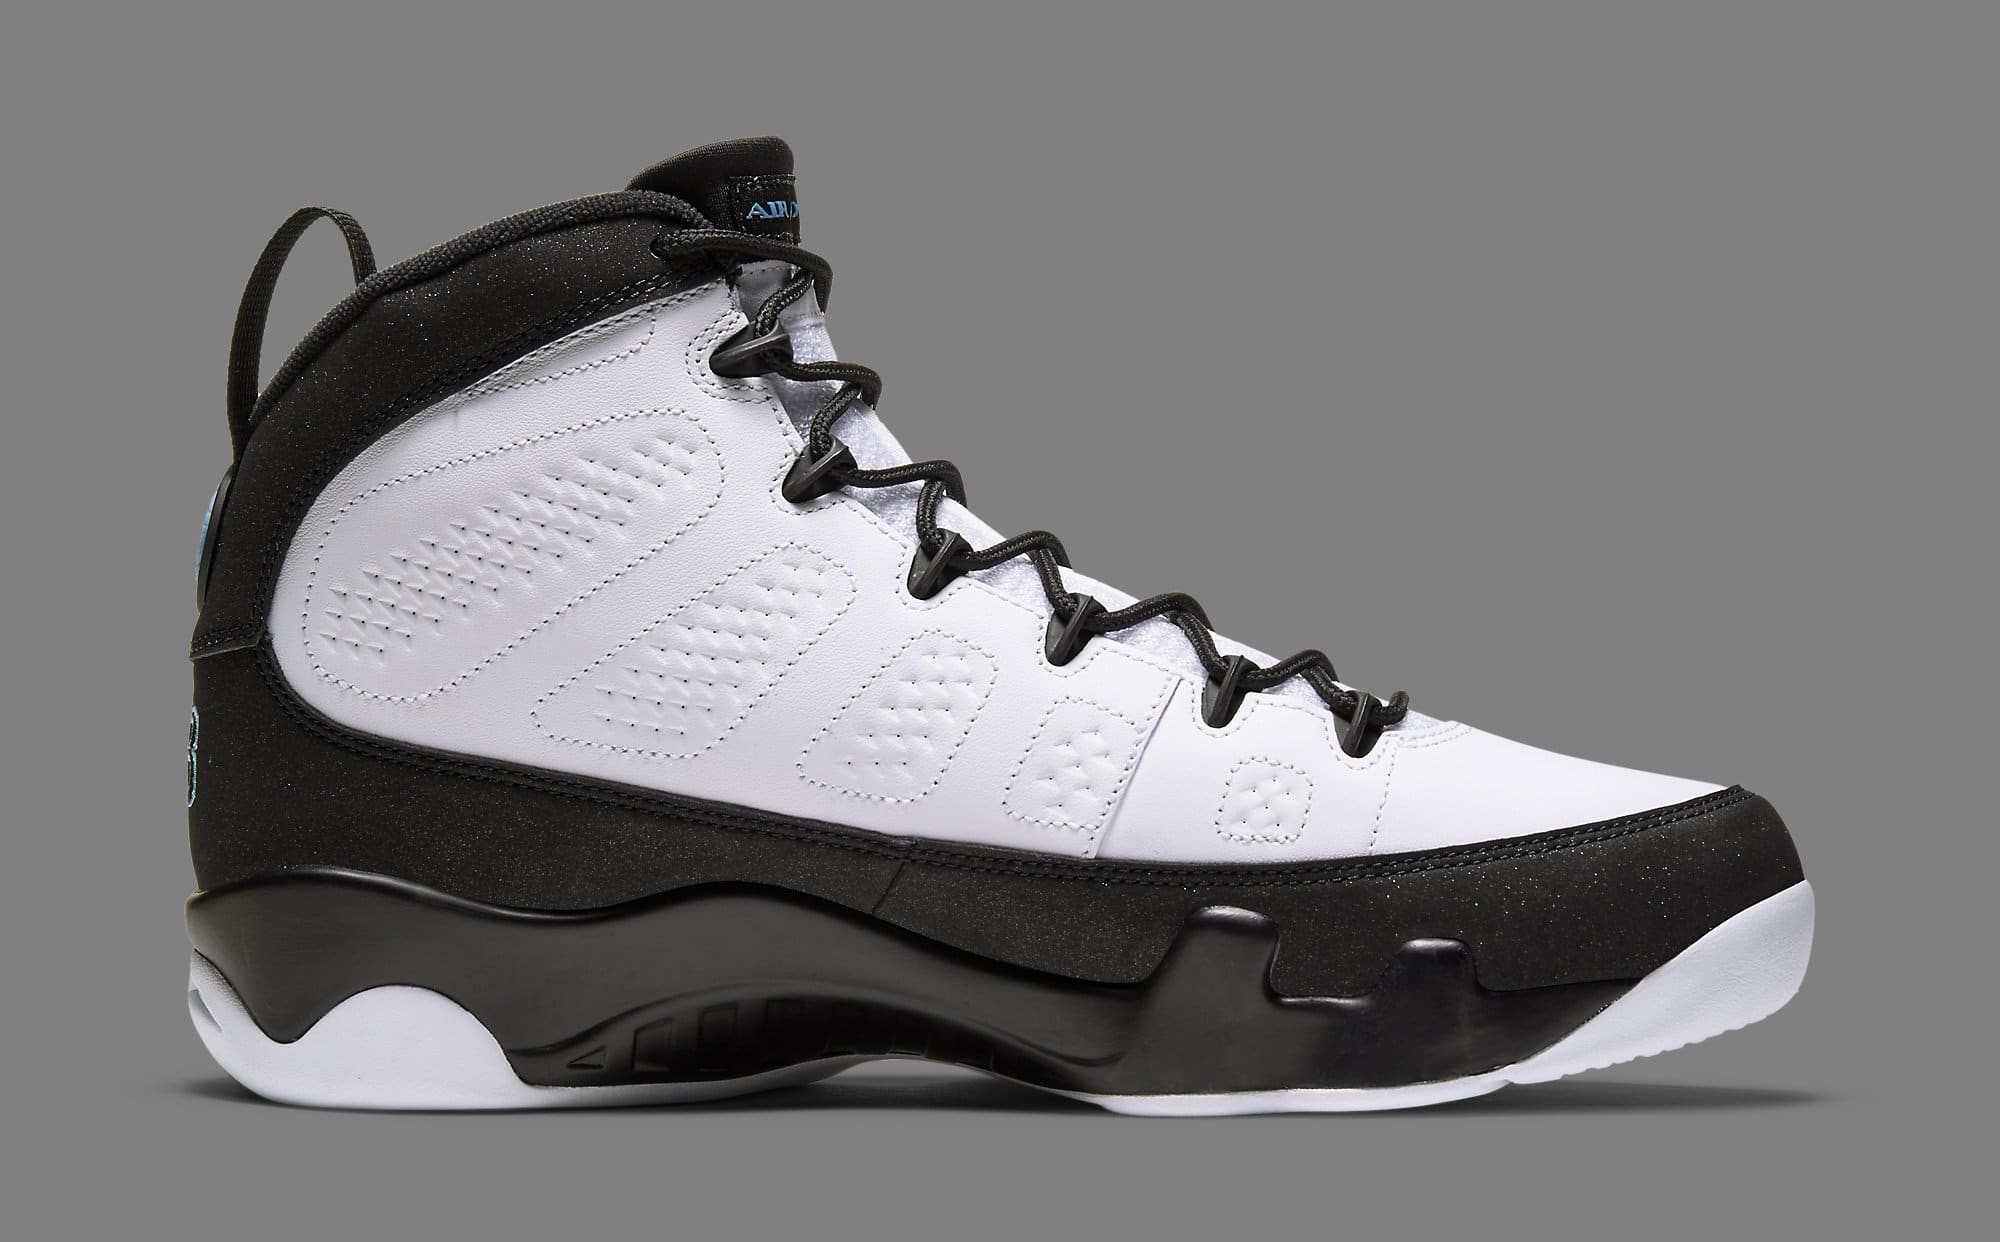 jordan 9s that came out today